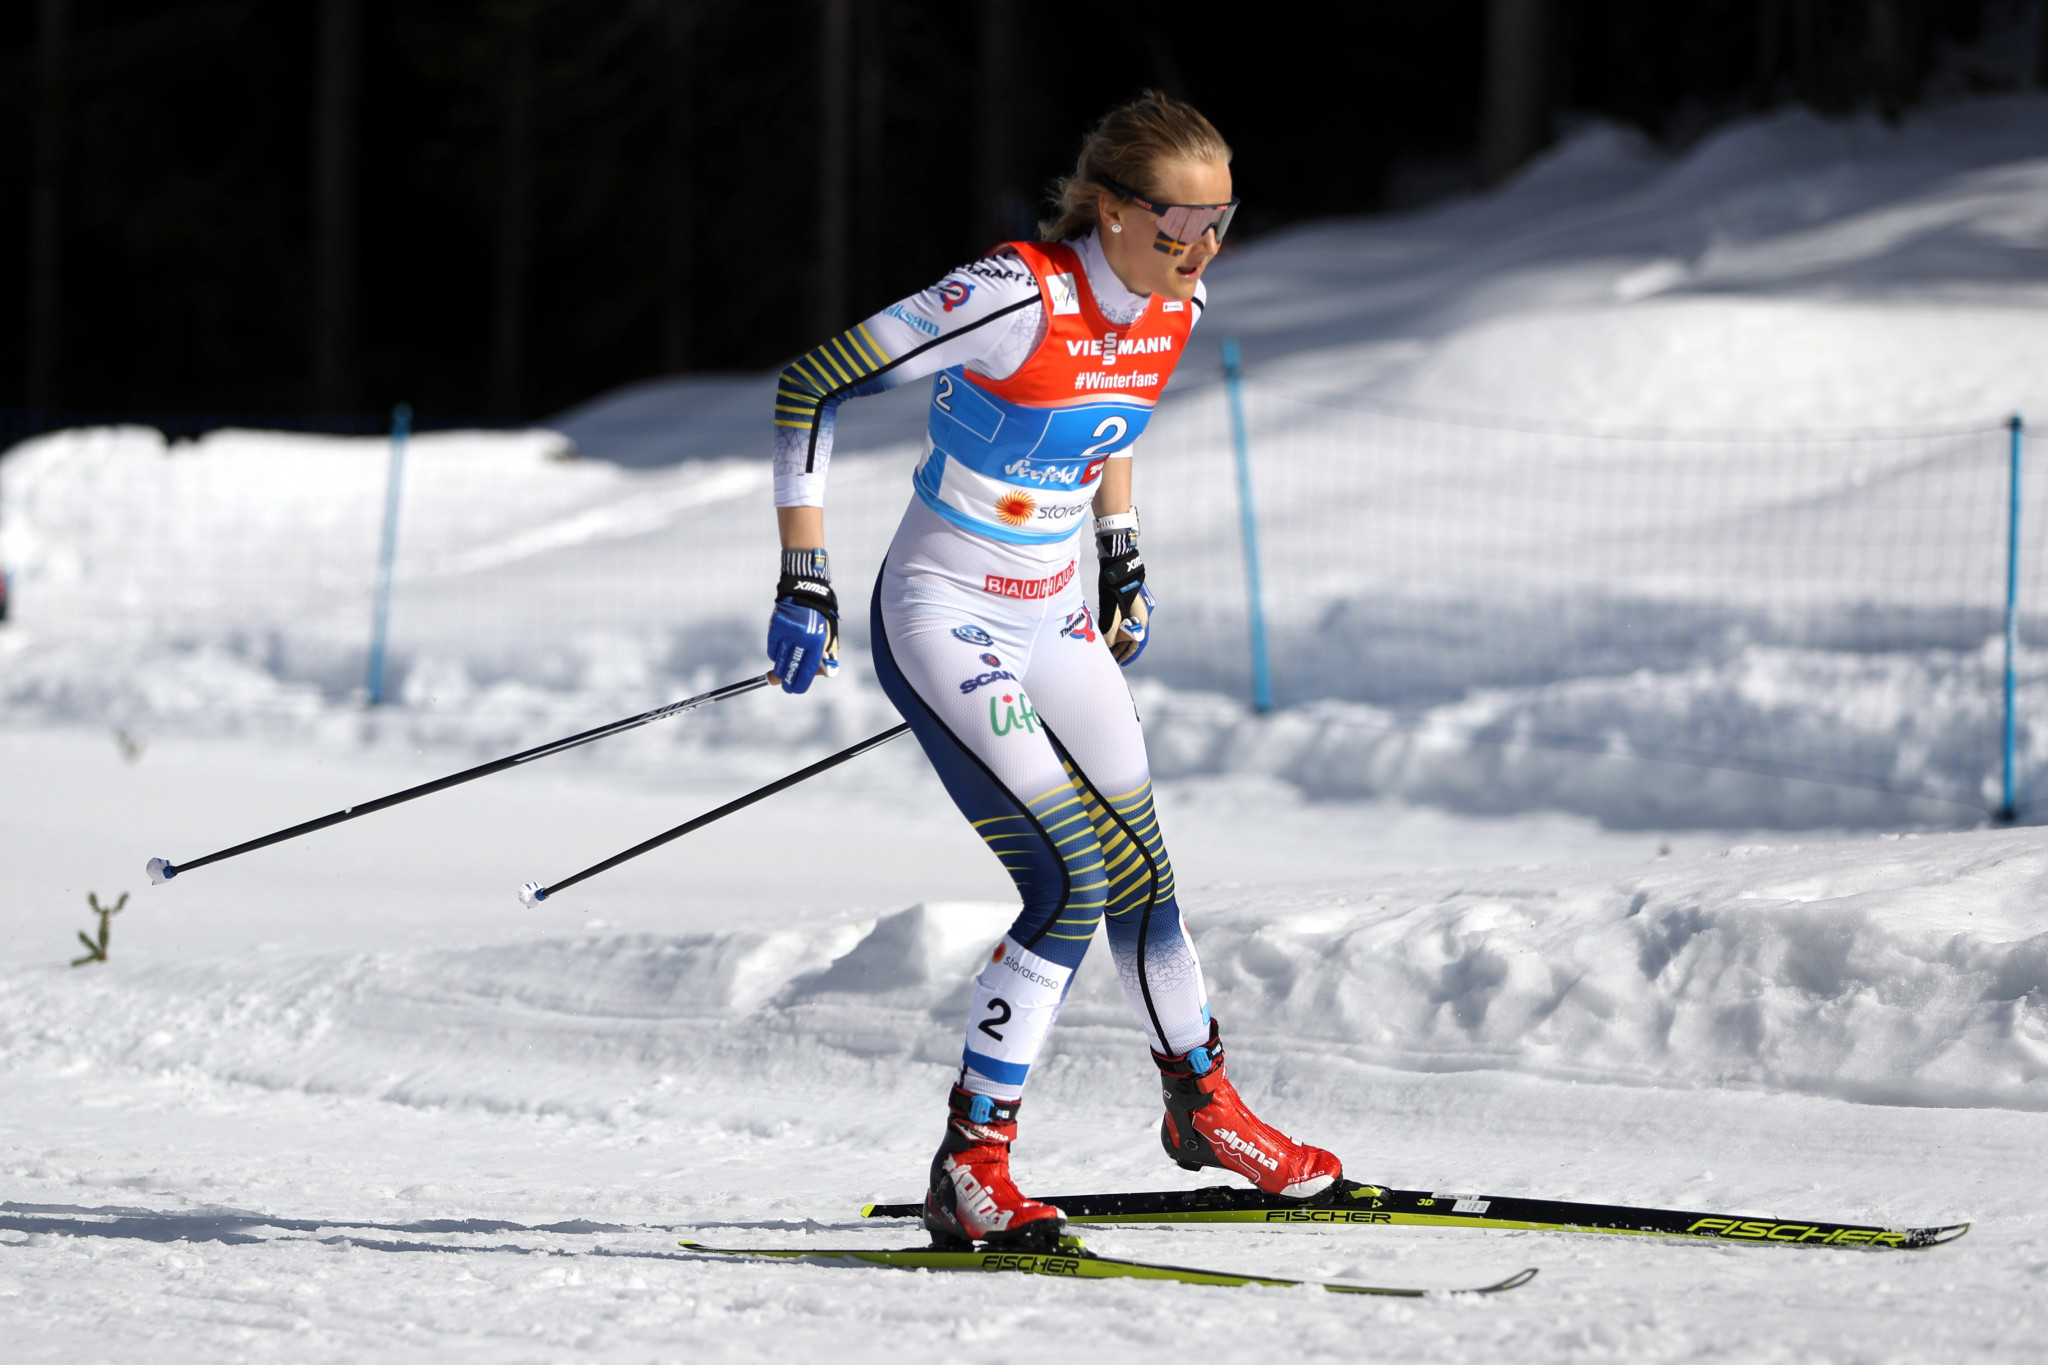 Olympic sprint champion Stina Nilsson of Sweden leads the women's World Cup standings in the shortest format ©Getty Images